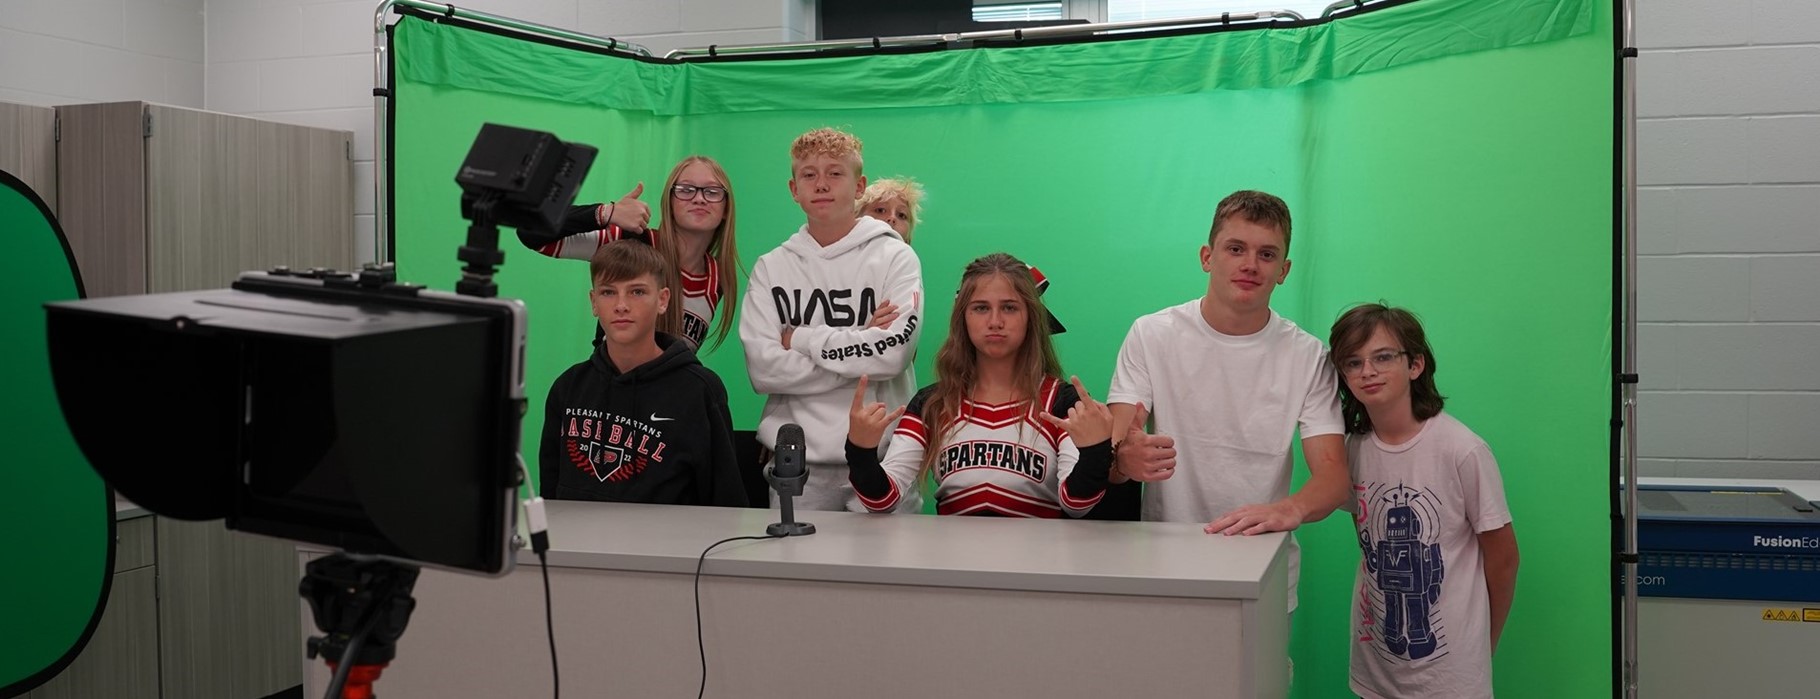 news time!  students in front of the green screen